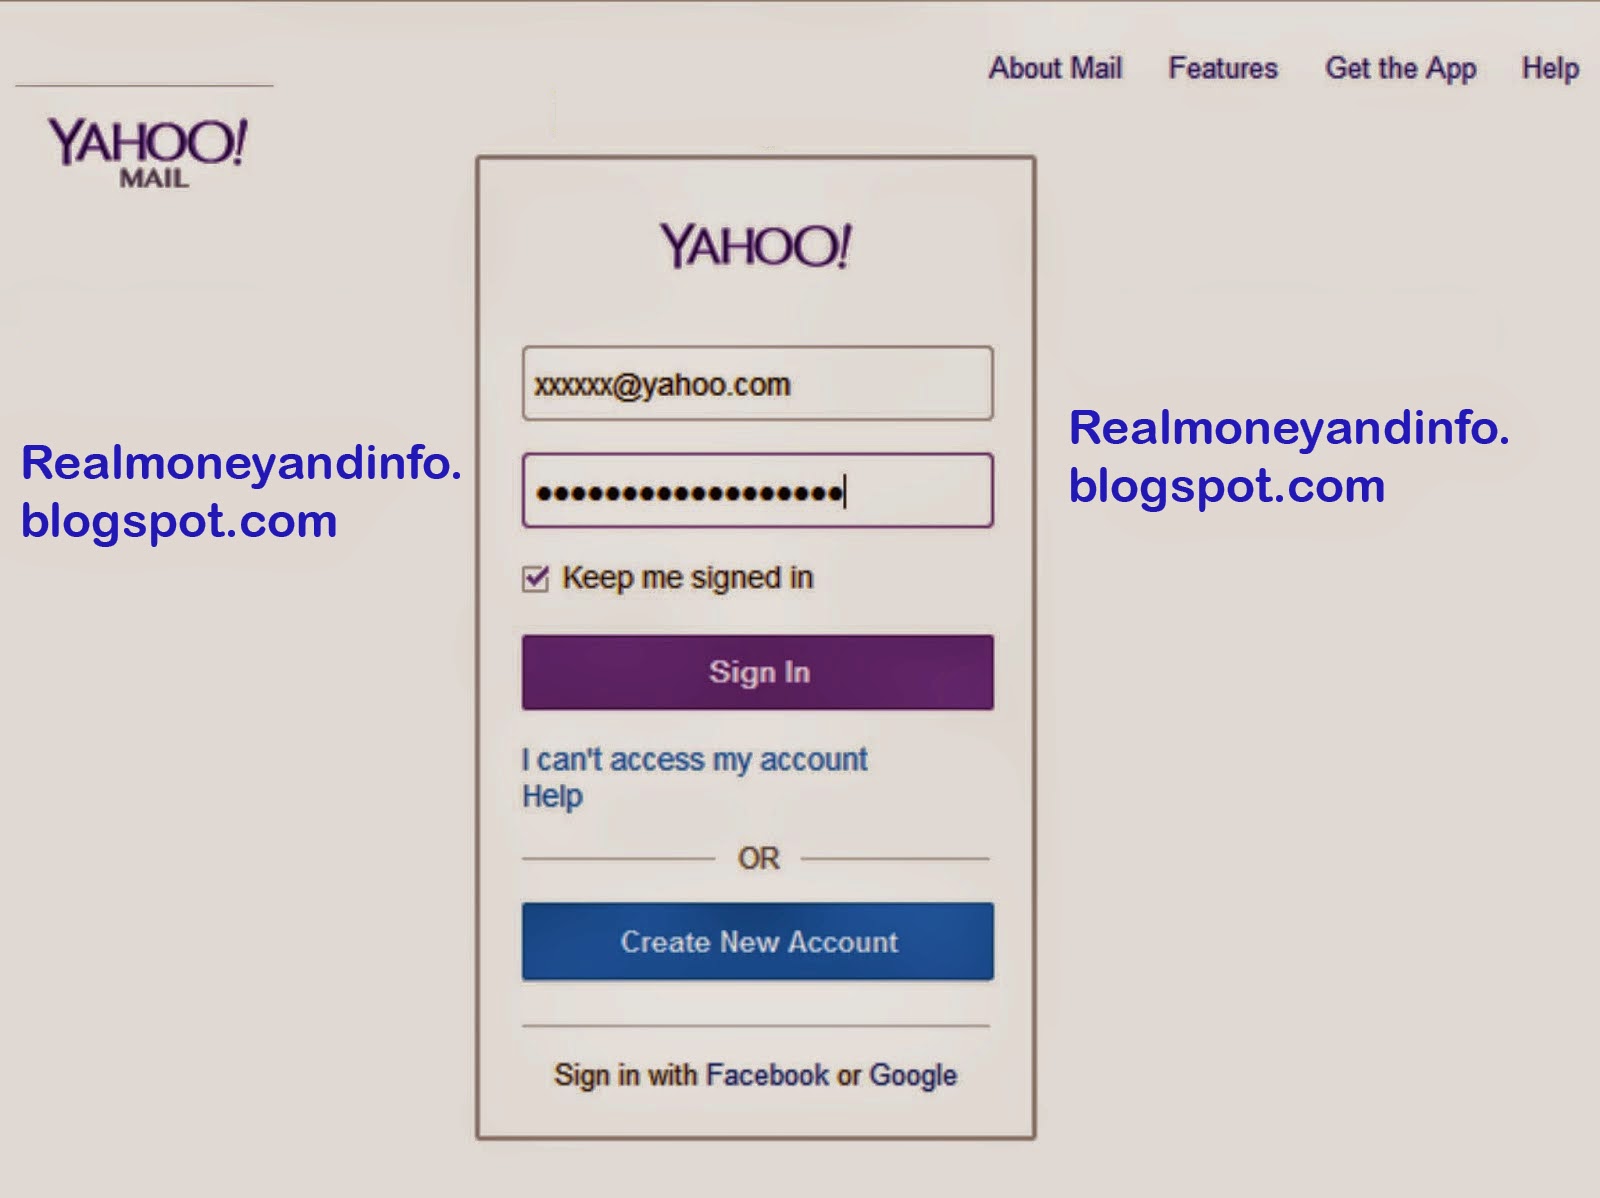 welcome to real money and information: www.yahoomail |yahoomail